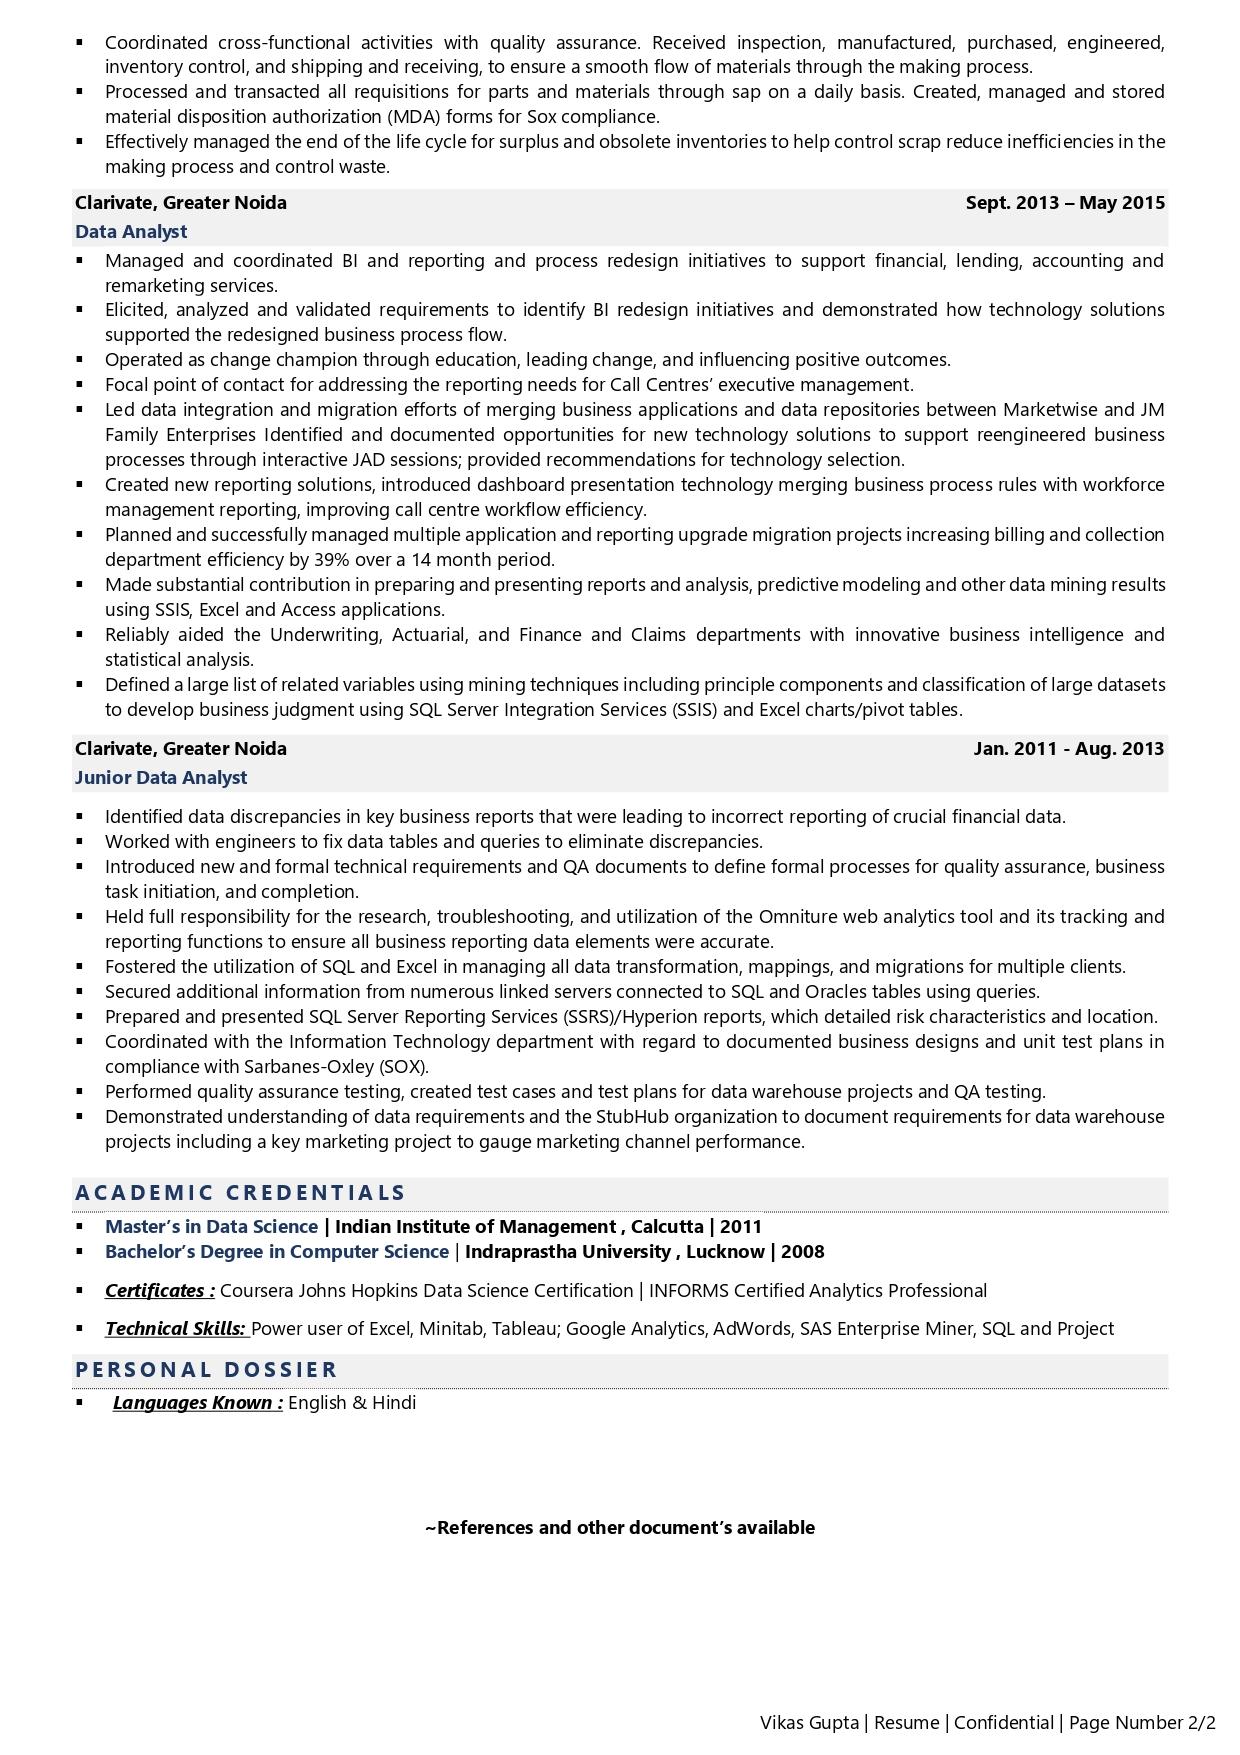 Data Analyst - Resume Example & Template